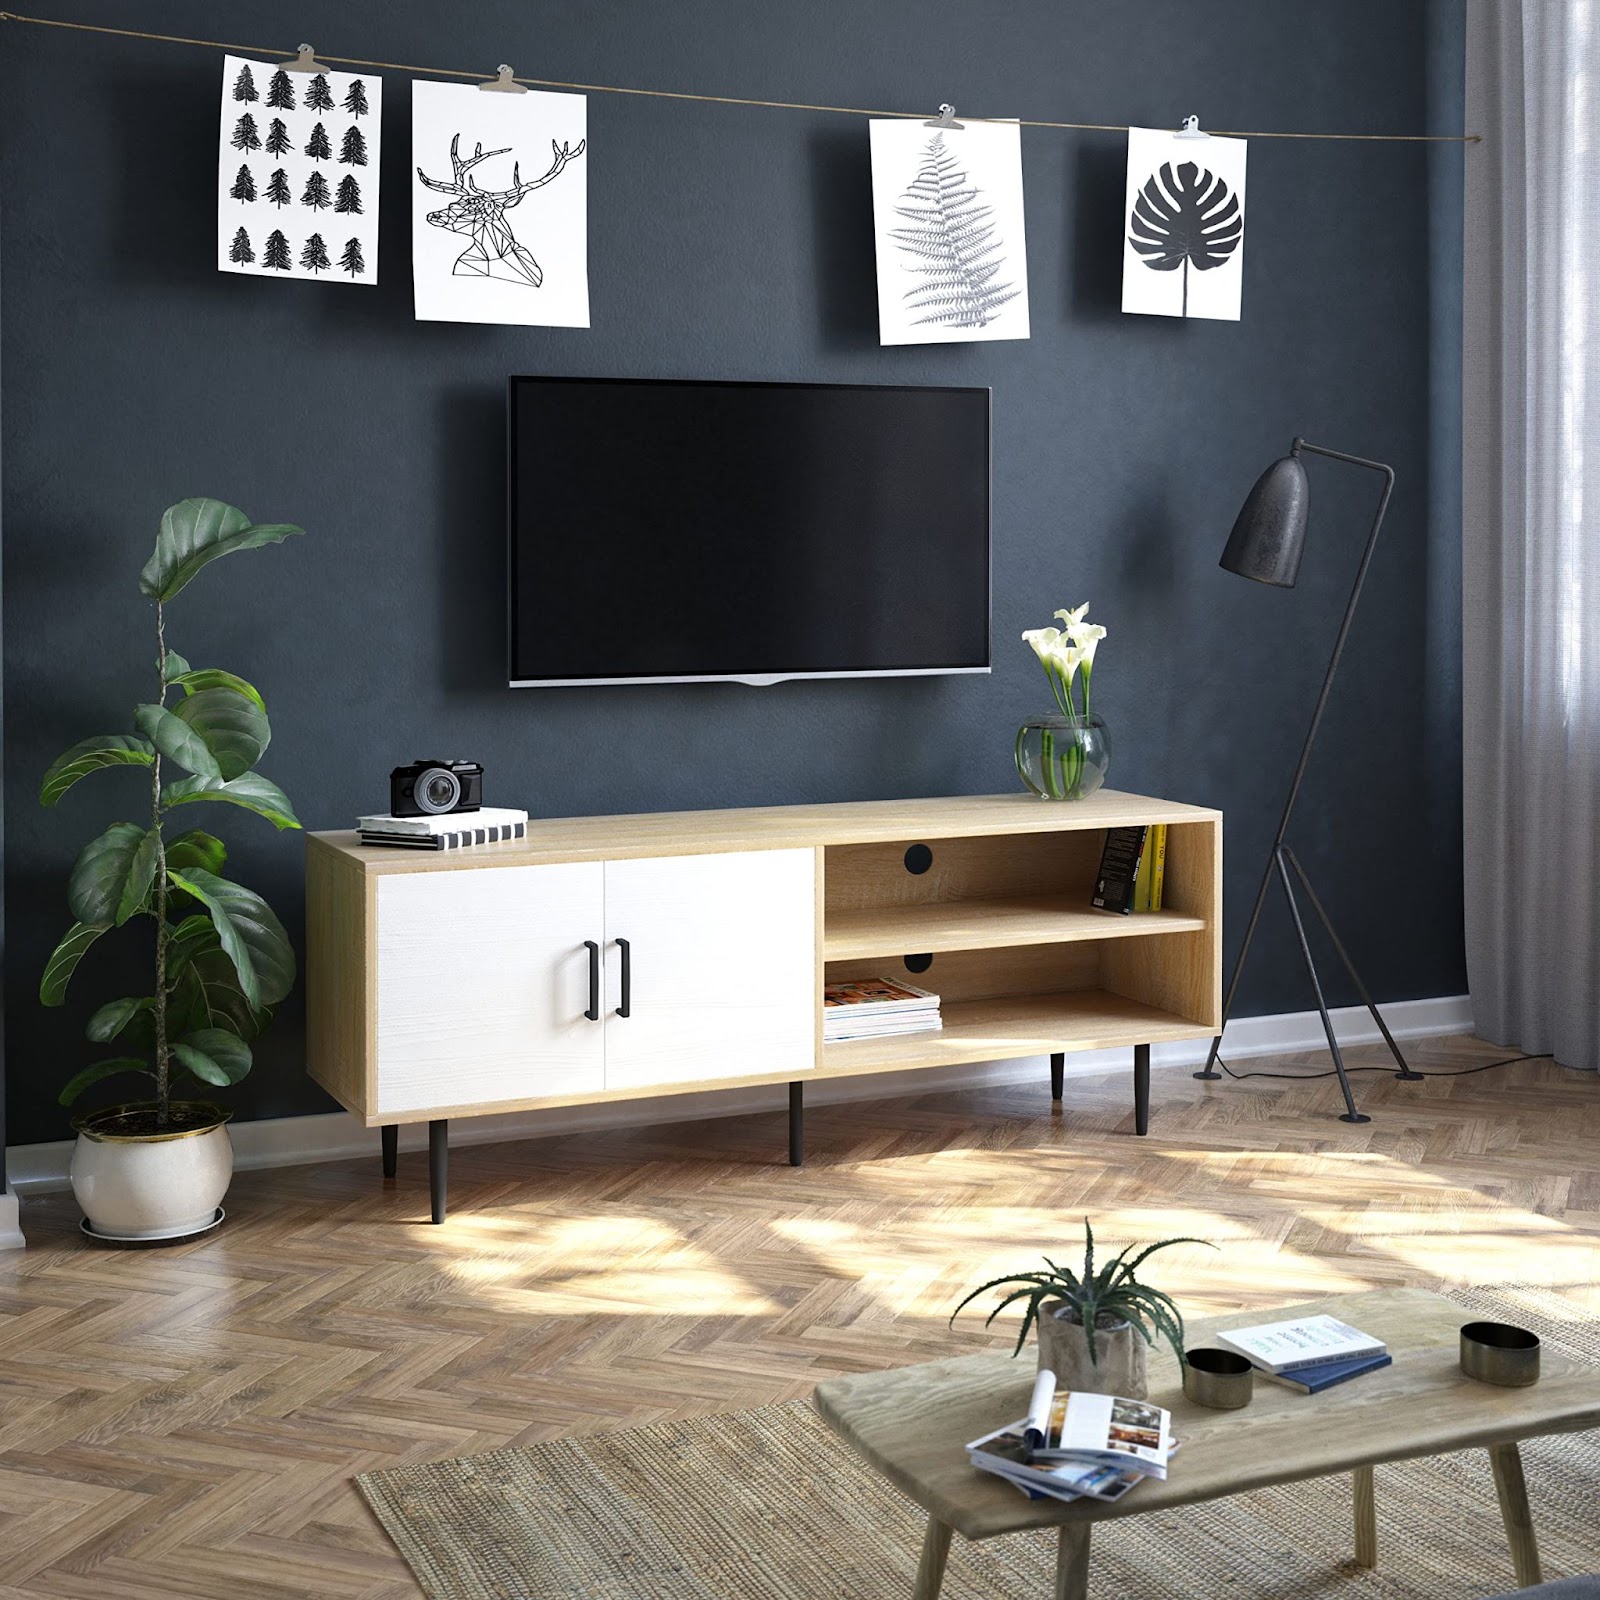 【PROPER SIZE】19.68” H × 15.75” W × 43.31” L. This TV & media furniture fits flat/curved screen TVs up to 50”. The top surface supports up to 132 lbs. 【SELECTED MATERIAL】Made of high-grade chipboard and edges sealed with PVC, the TV console is waterproof and highly resistant to wear, scratch, and corrosion.